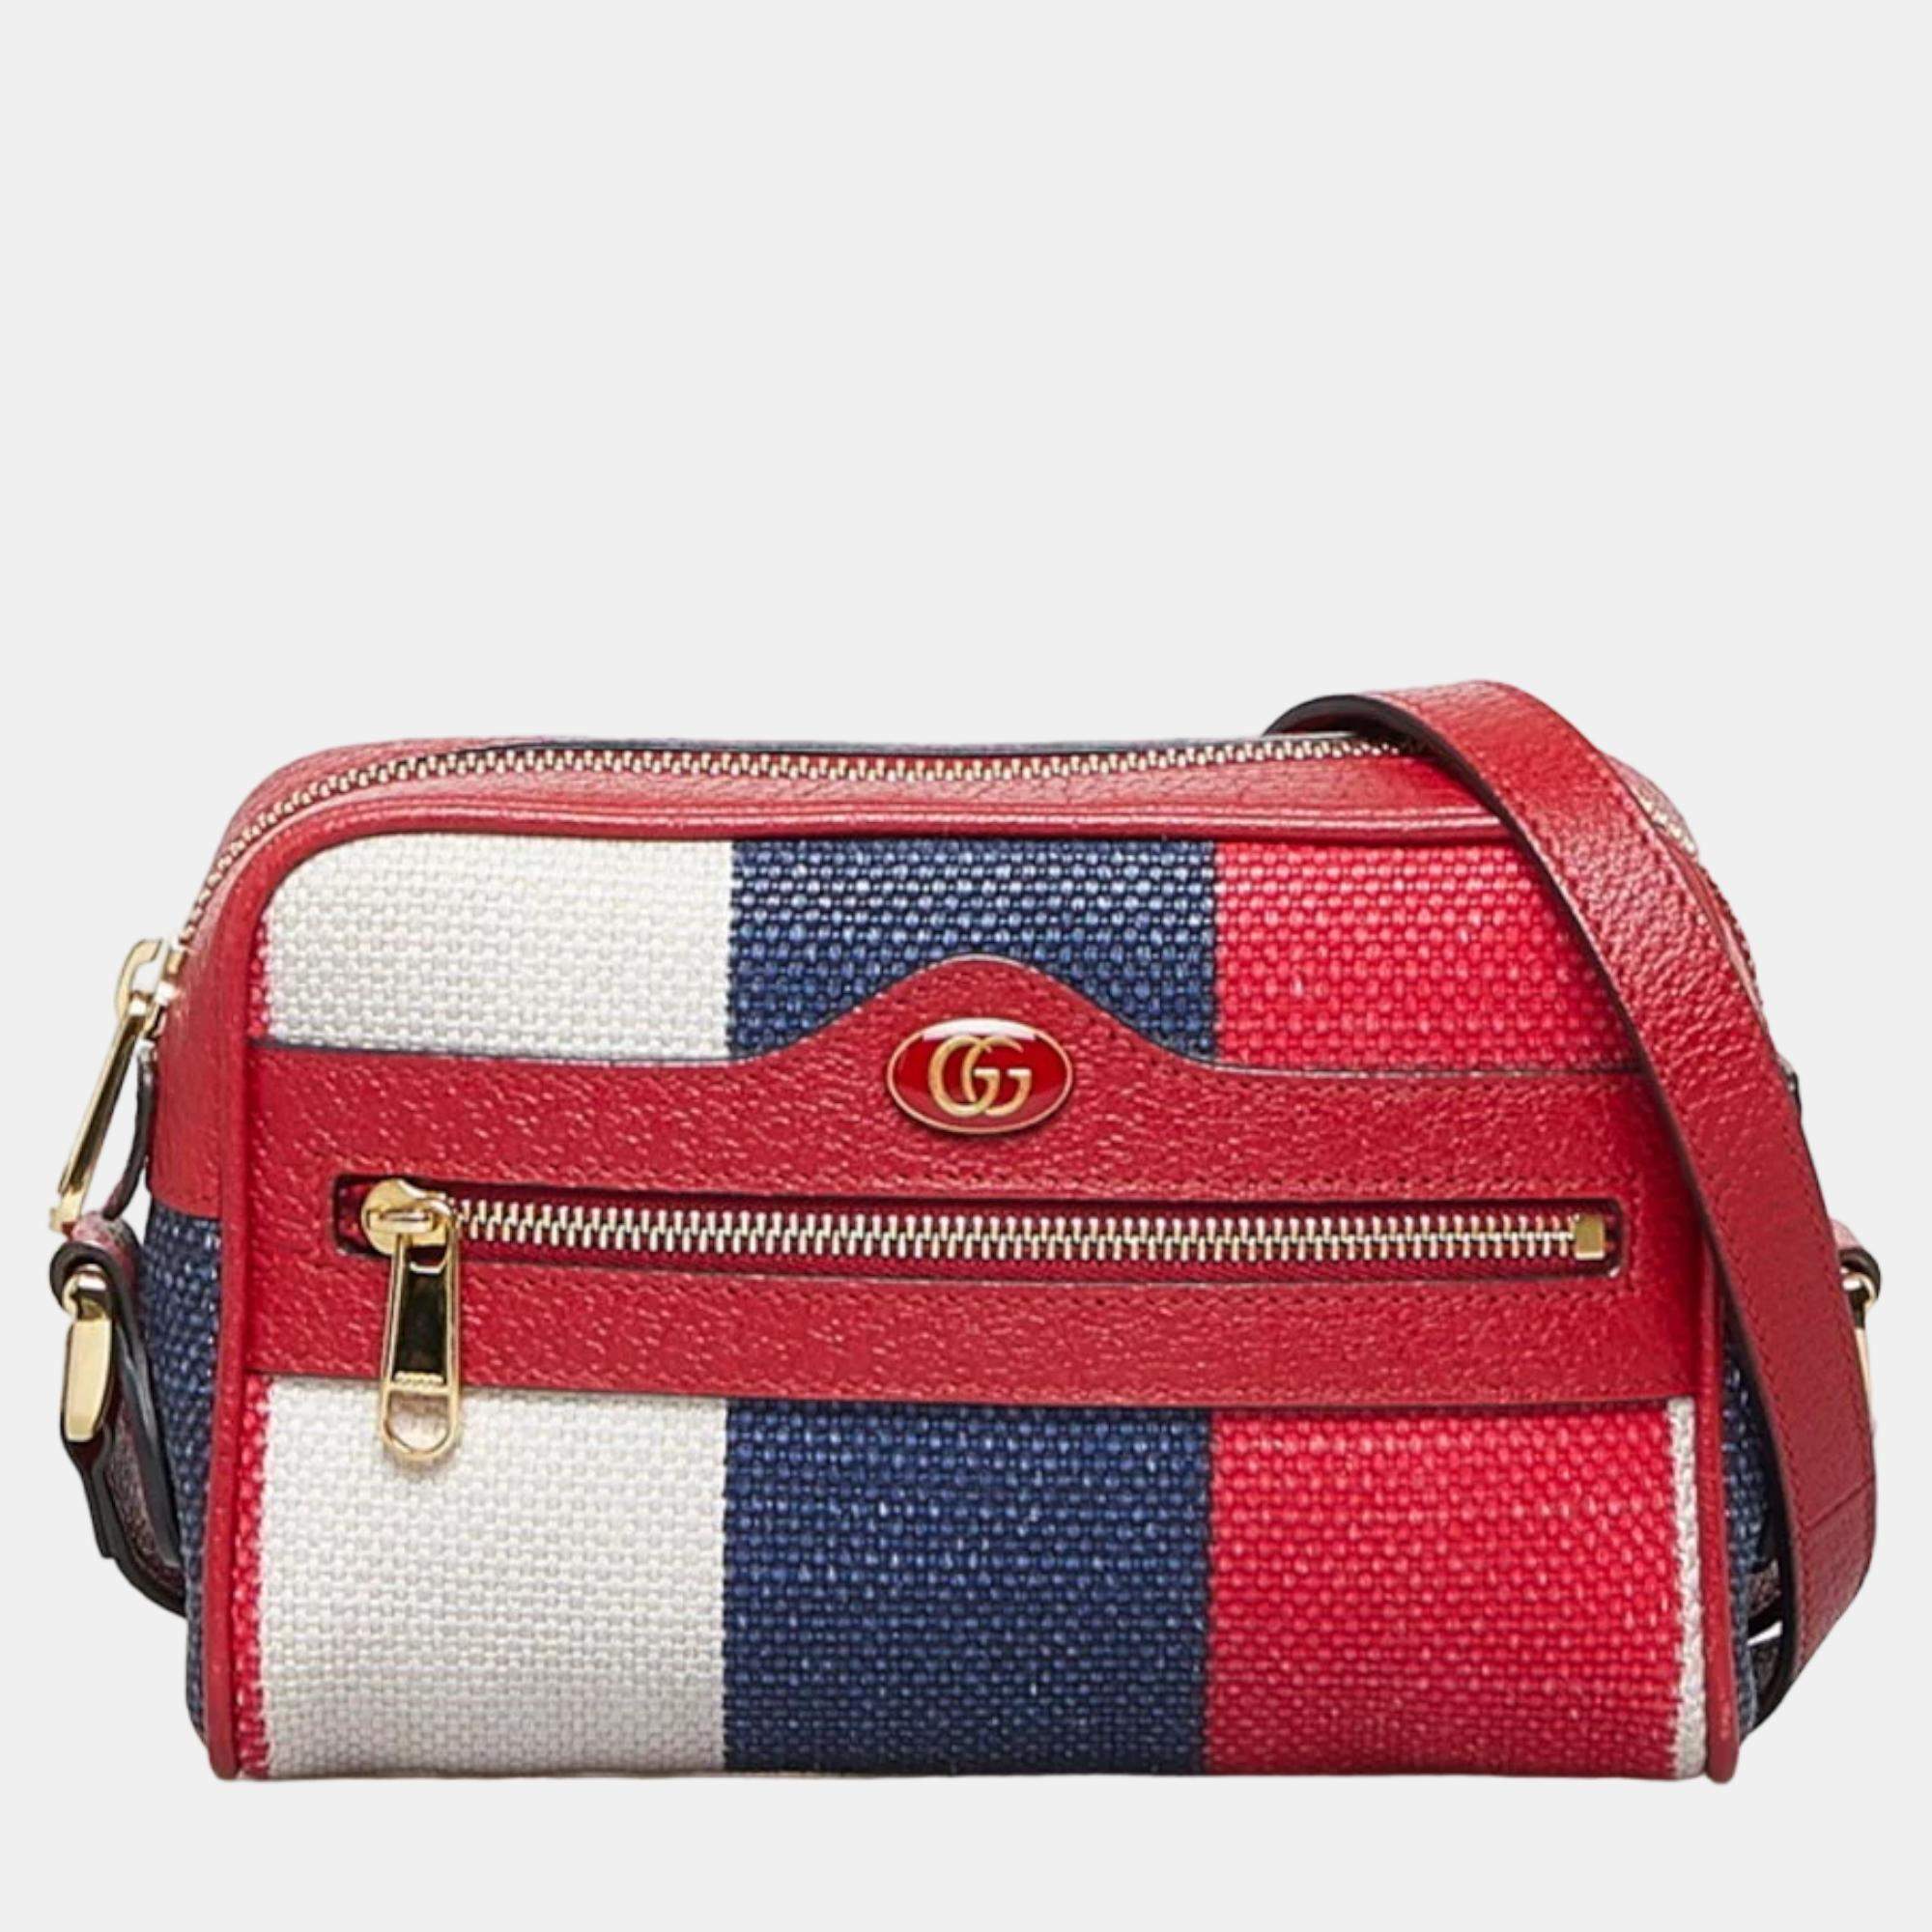 Red White Blue Purse 